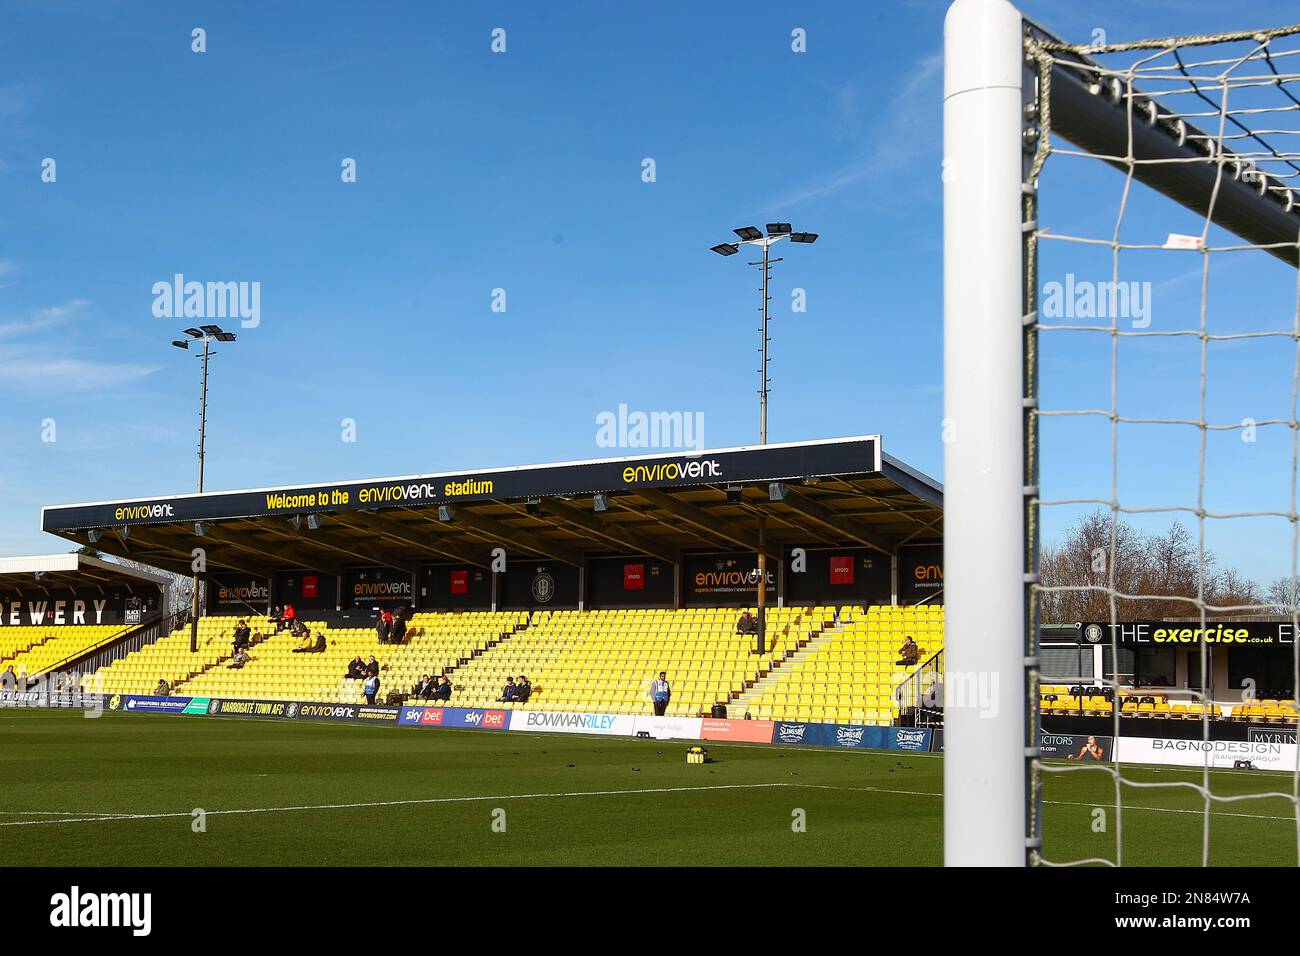 The EnviroVent Stadium, Harrogate, England - 11th February 2023 General view of the ground - before the game Harrogate Town v Stockport County, EFL League 2, 2022/23, at The EnviroVent Stadium, Harrogate, England - 11th February 2023  Credit: Arthur Haigh/WhiteRosePhotos/Alamy Live News Stock Photo